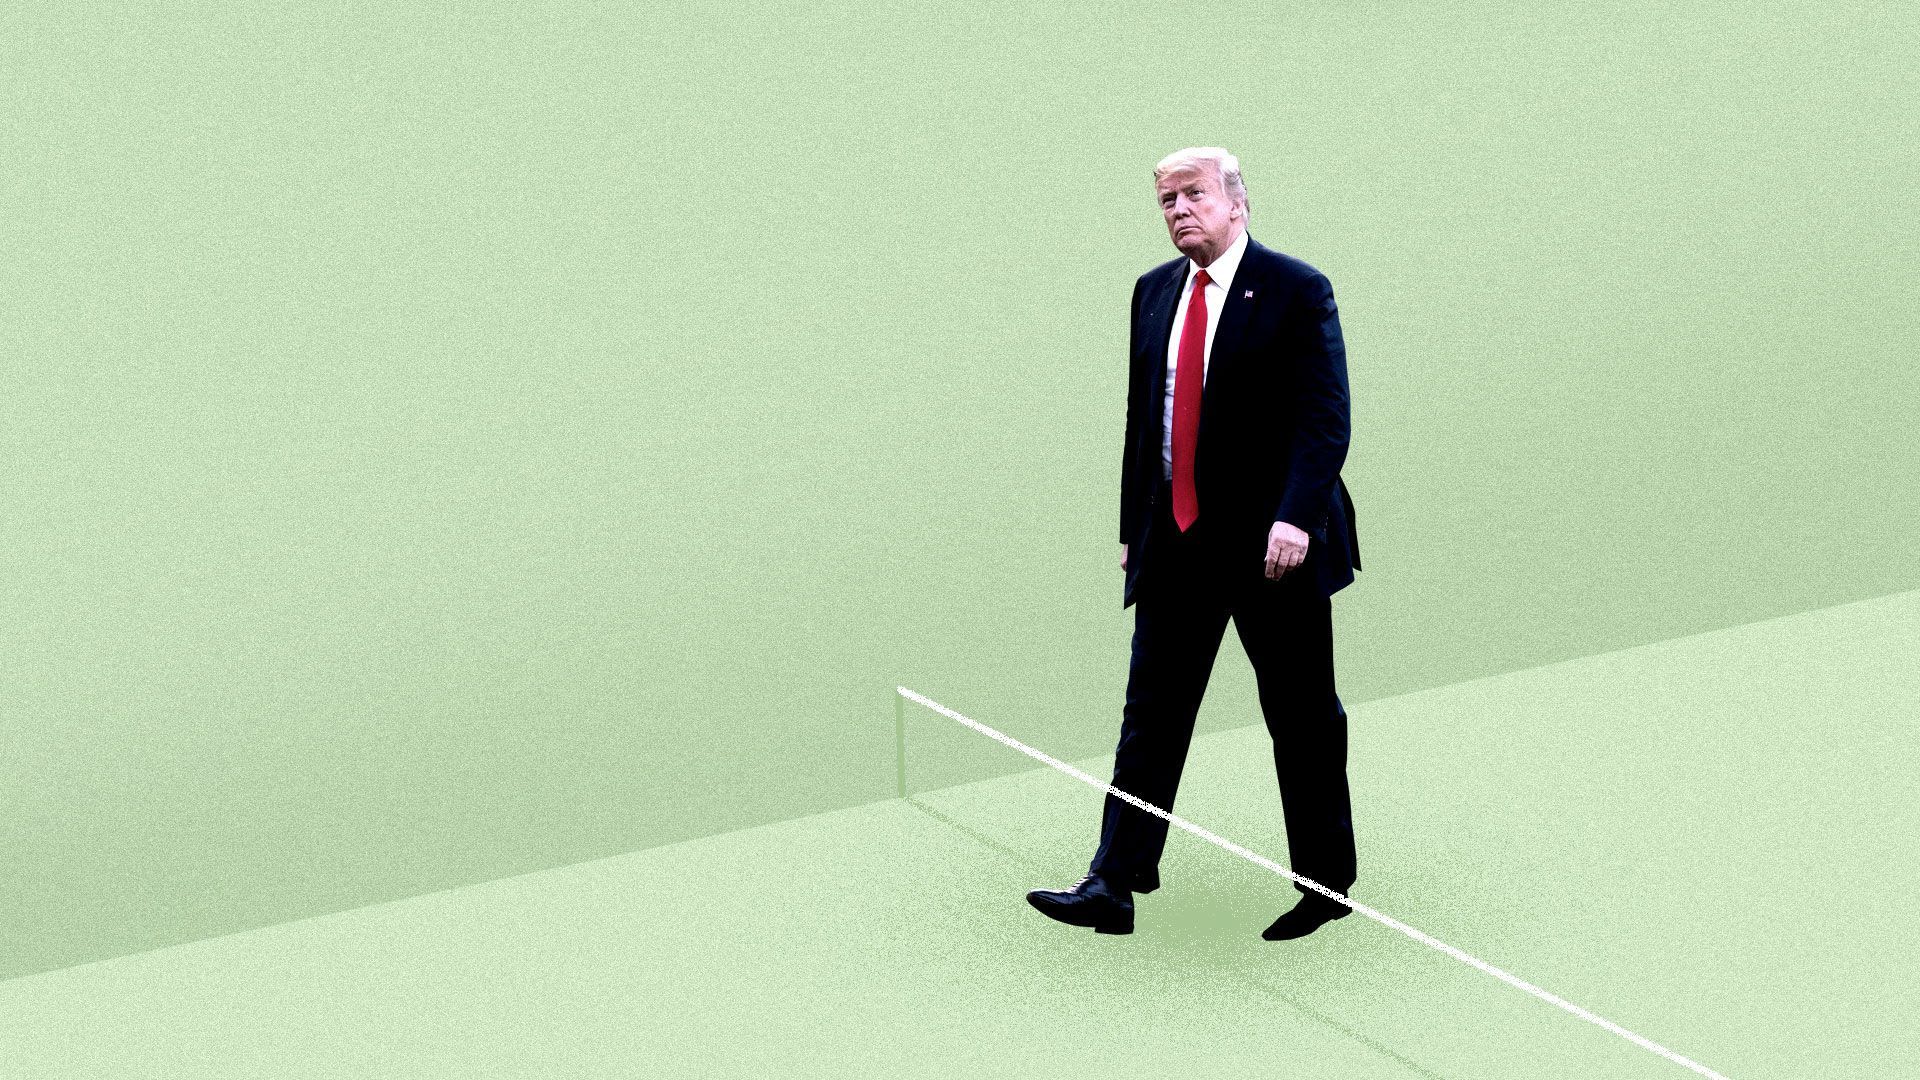 An illustration of Trump walking into a trap 